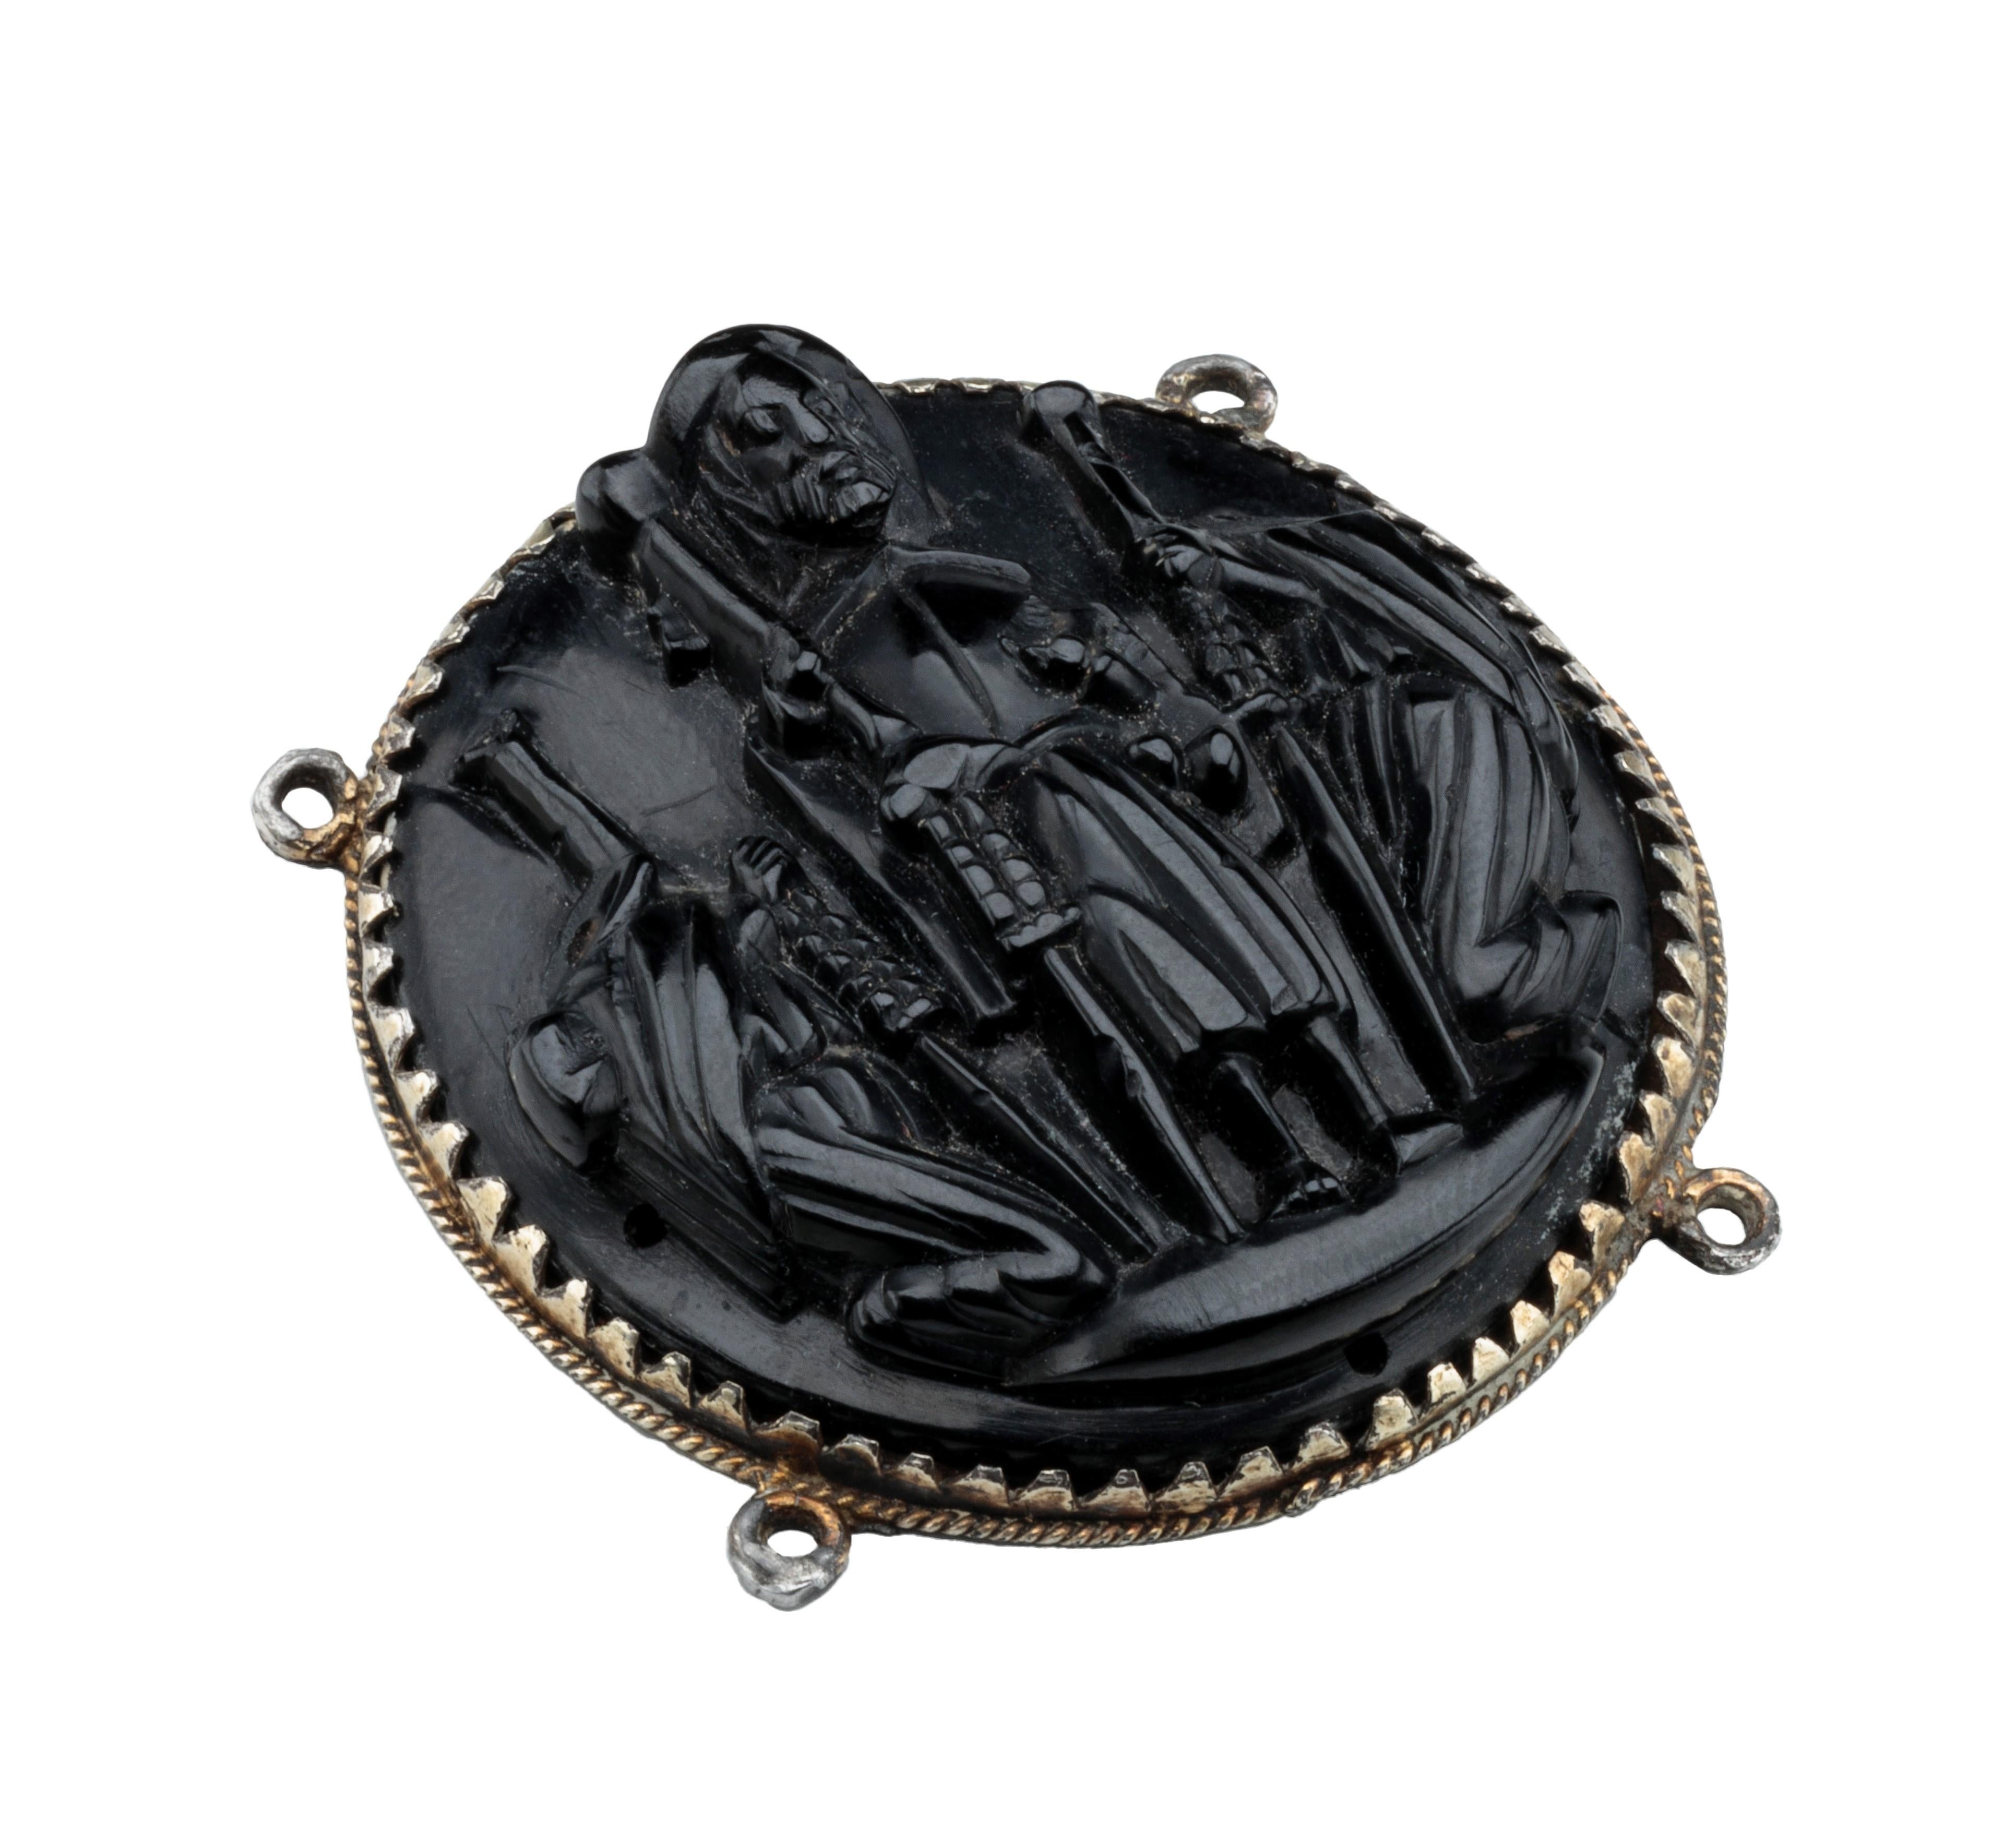 BADGE WITH ST. JAMES THE GREAT 
Northern Spain, 16th century 
Silver, jet 
Weight 18.2 grams; dimensions 44 × 43 × 12 mm

Round pendant with high-relief image of St. James the Great of Santiago de Compostela carved in jet. The saint is flanked by